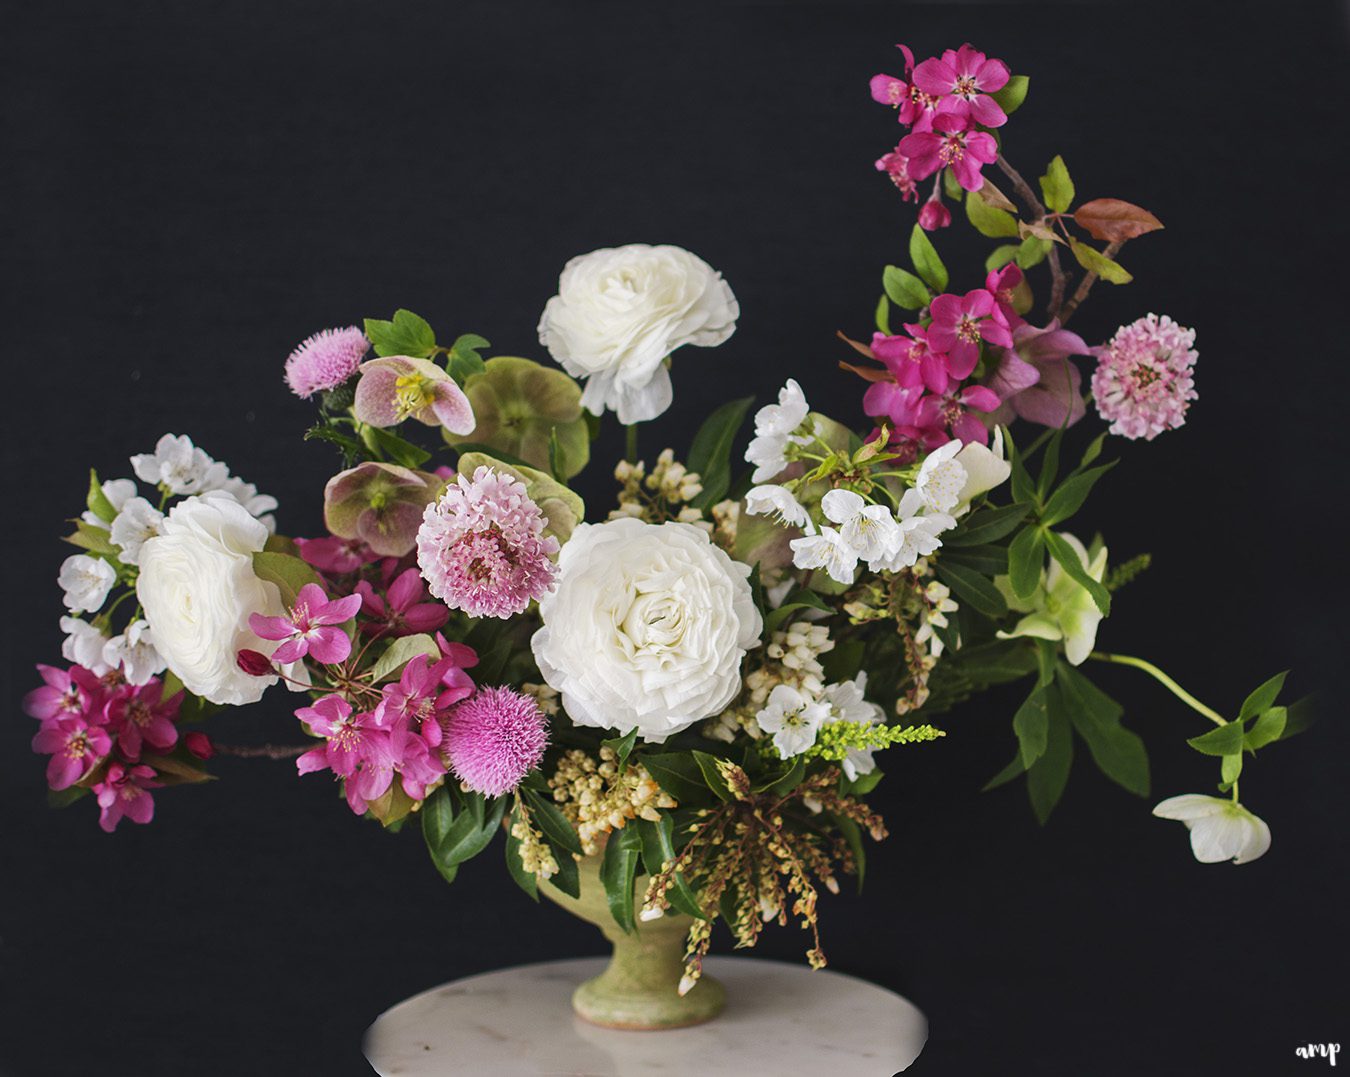 Centerpiece with white and pink florals